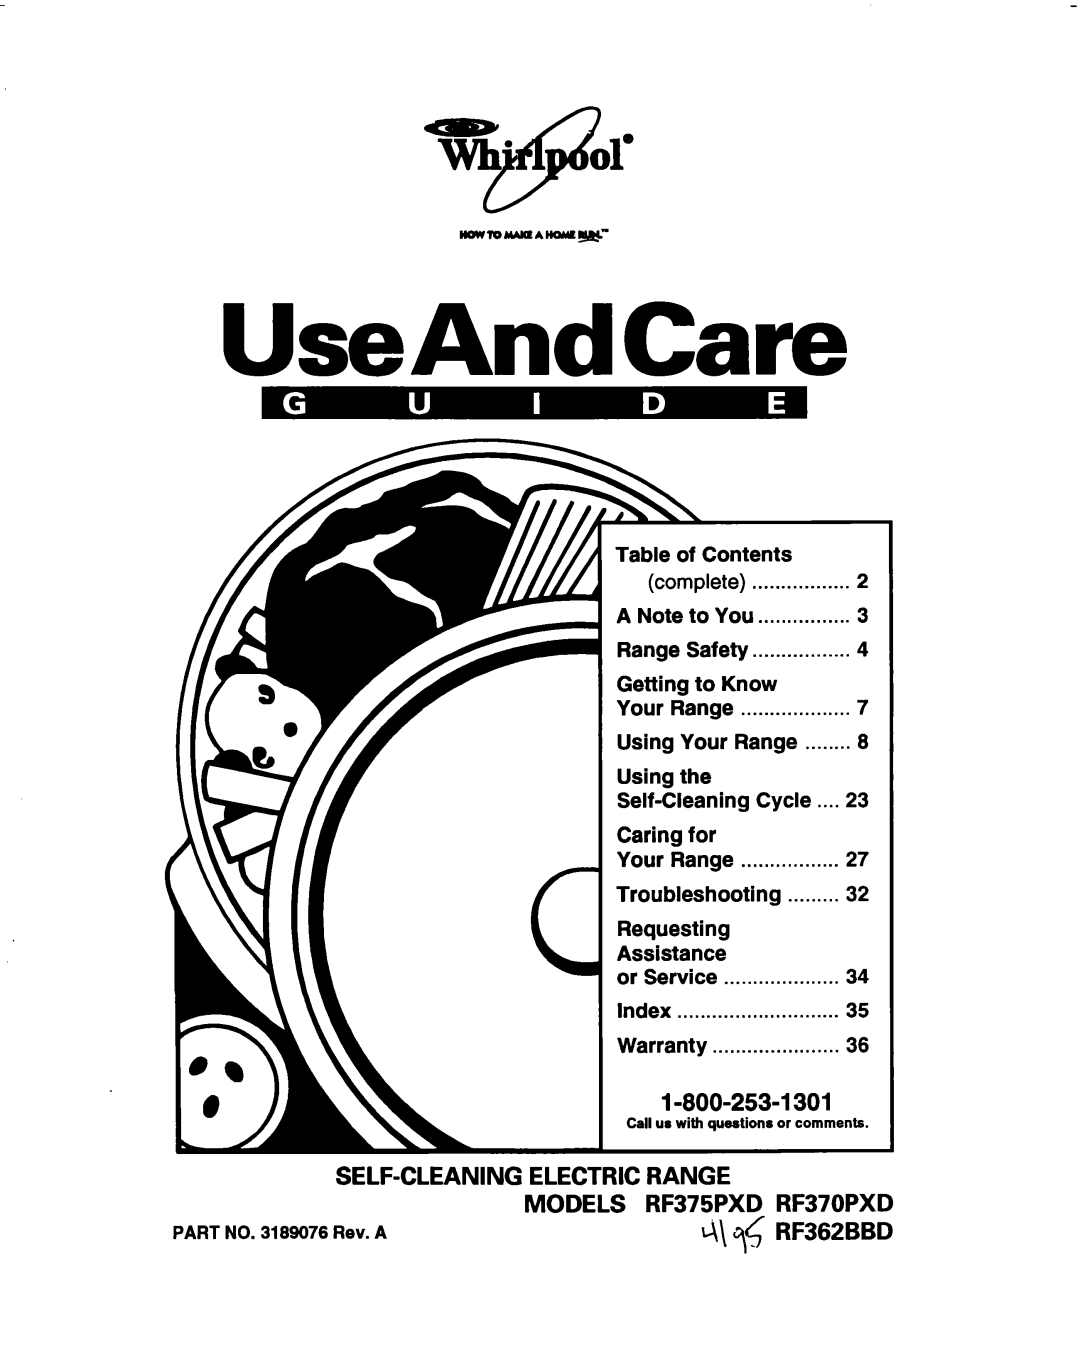 Whirlpool RF370PXD, RF362BBD manual UseAndCare, 1-800-253-l301, Self-Cleaningelectric Range, Models, RF375PXD, t\\ y 